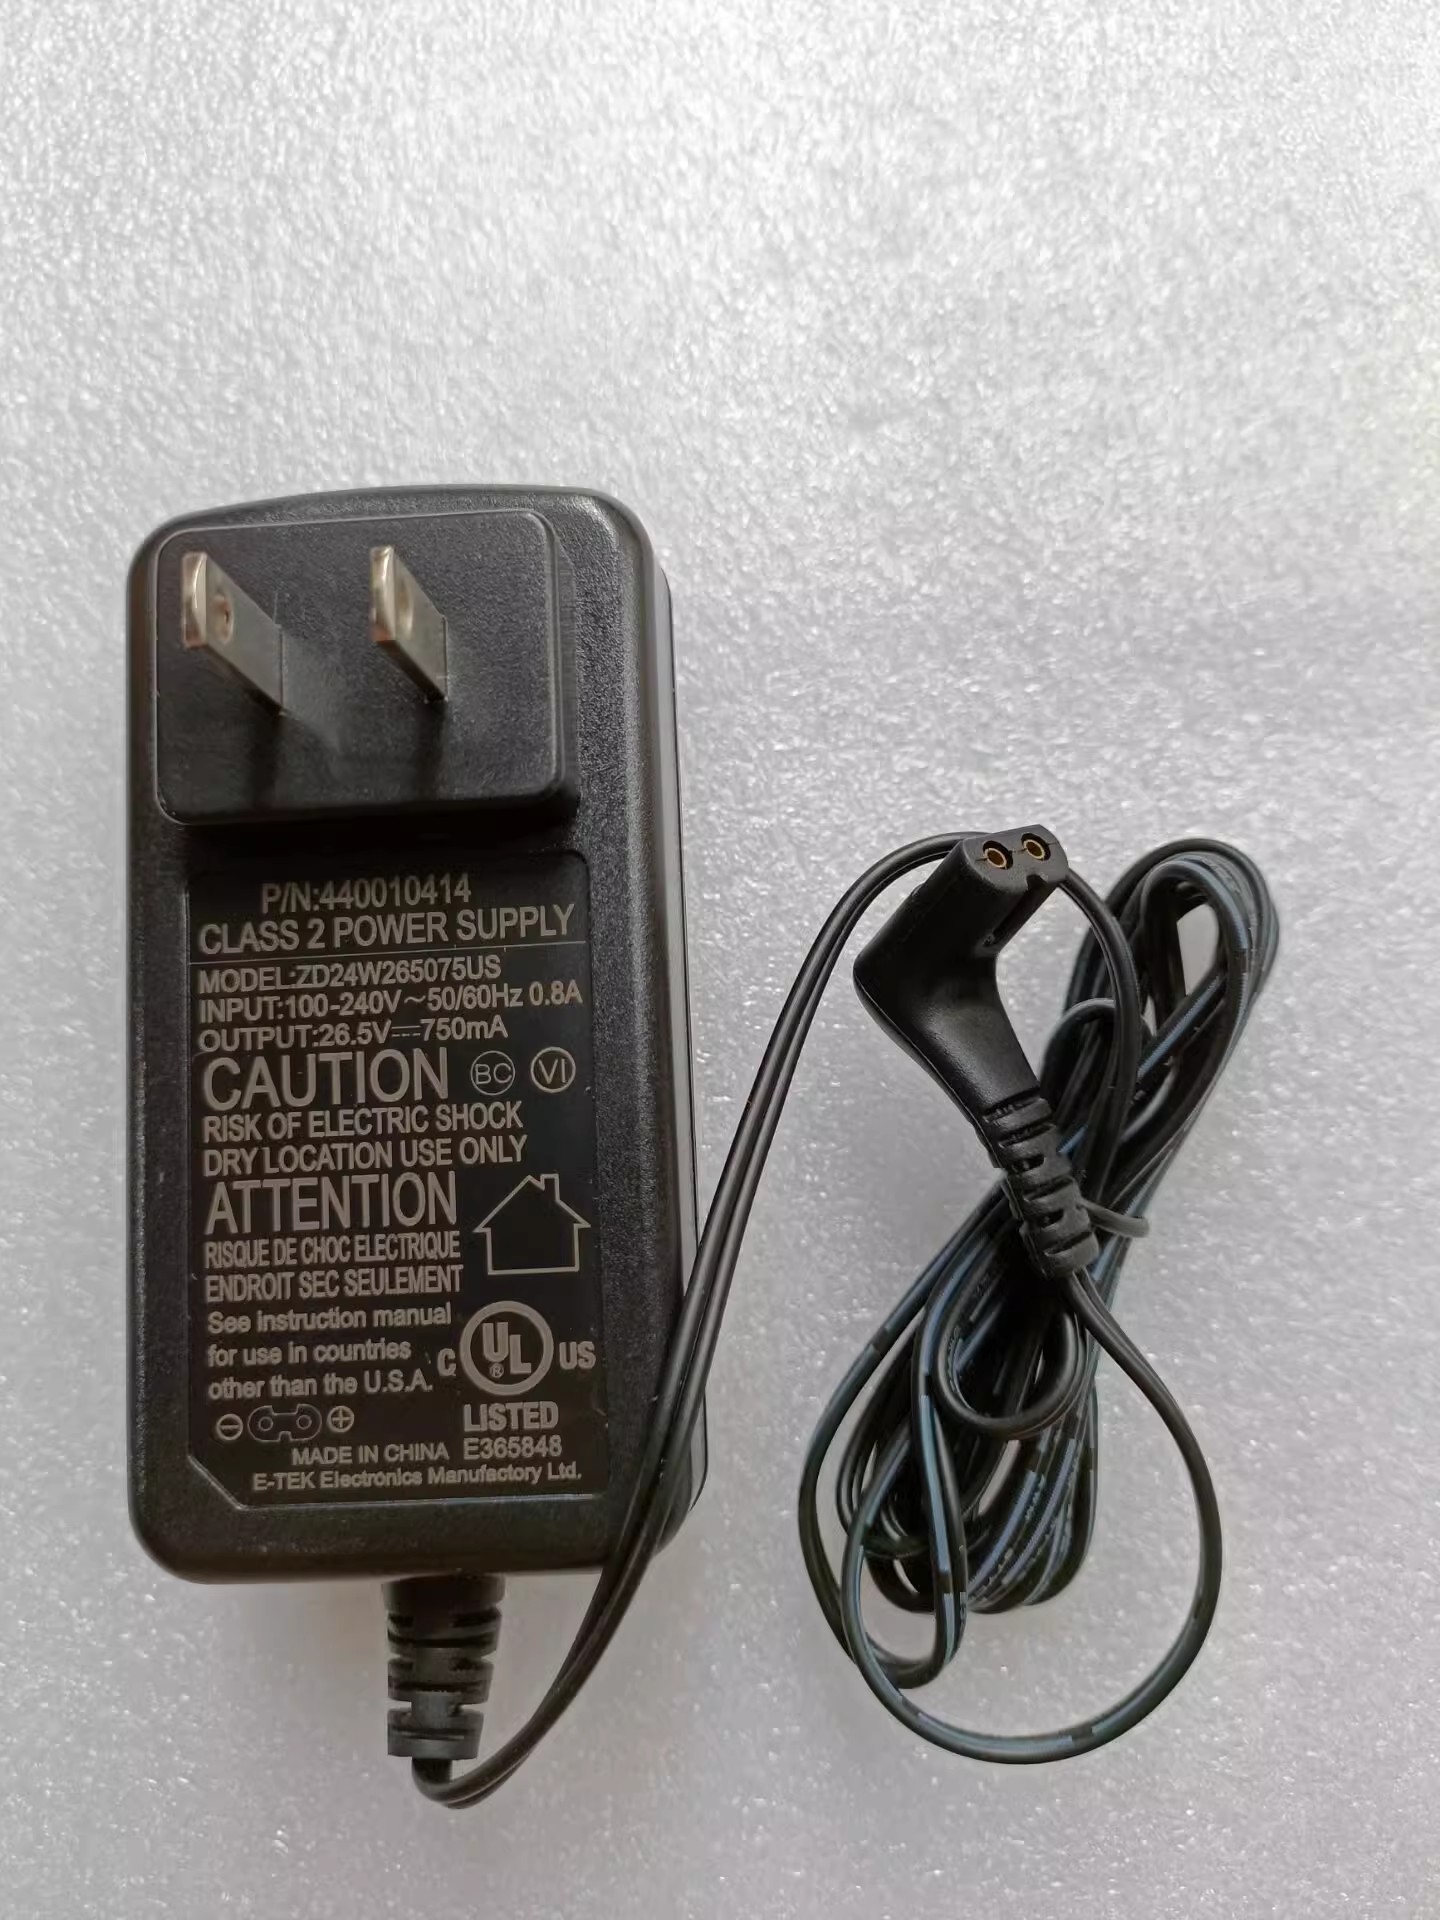 *Brand NEW* Hoover ZD24W265075US 26.5V 750MA AC DC ADAPTHE POWER Supply